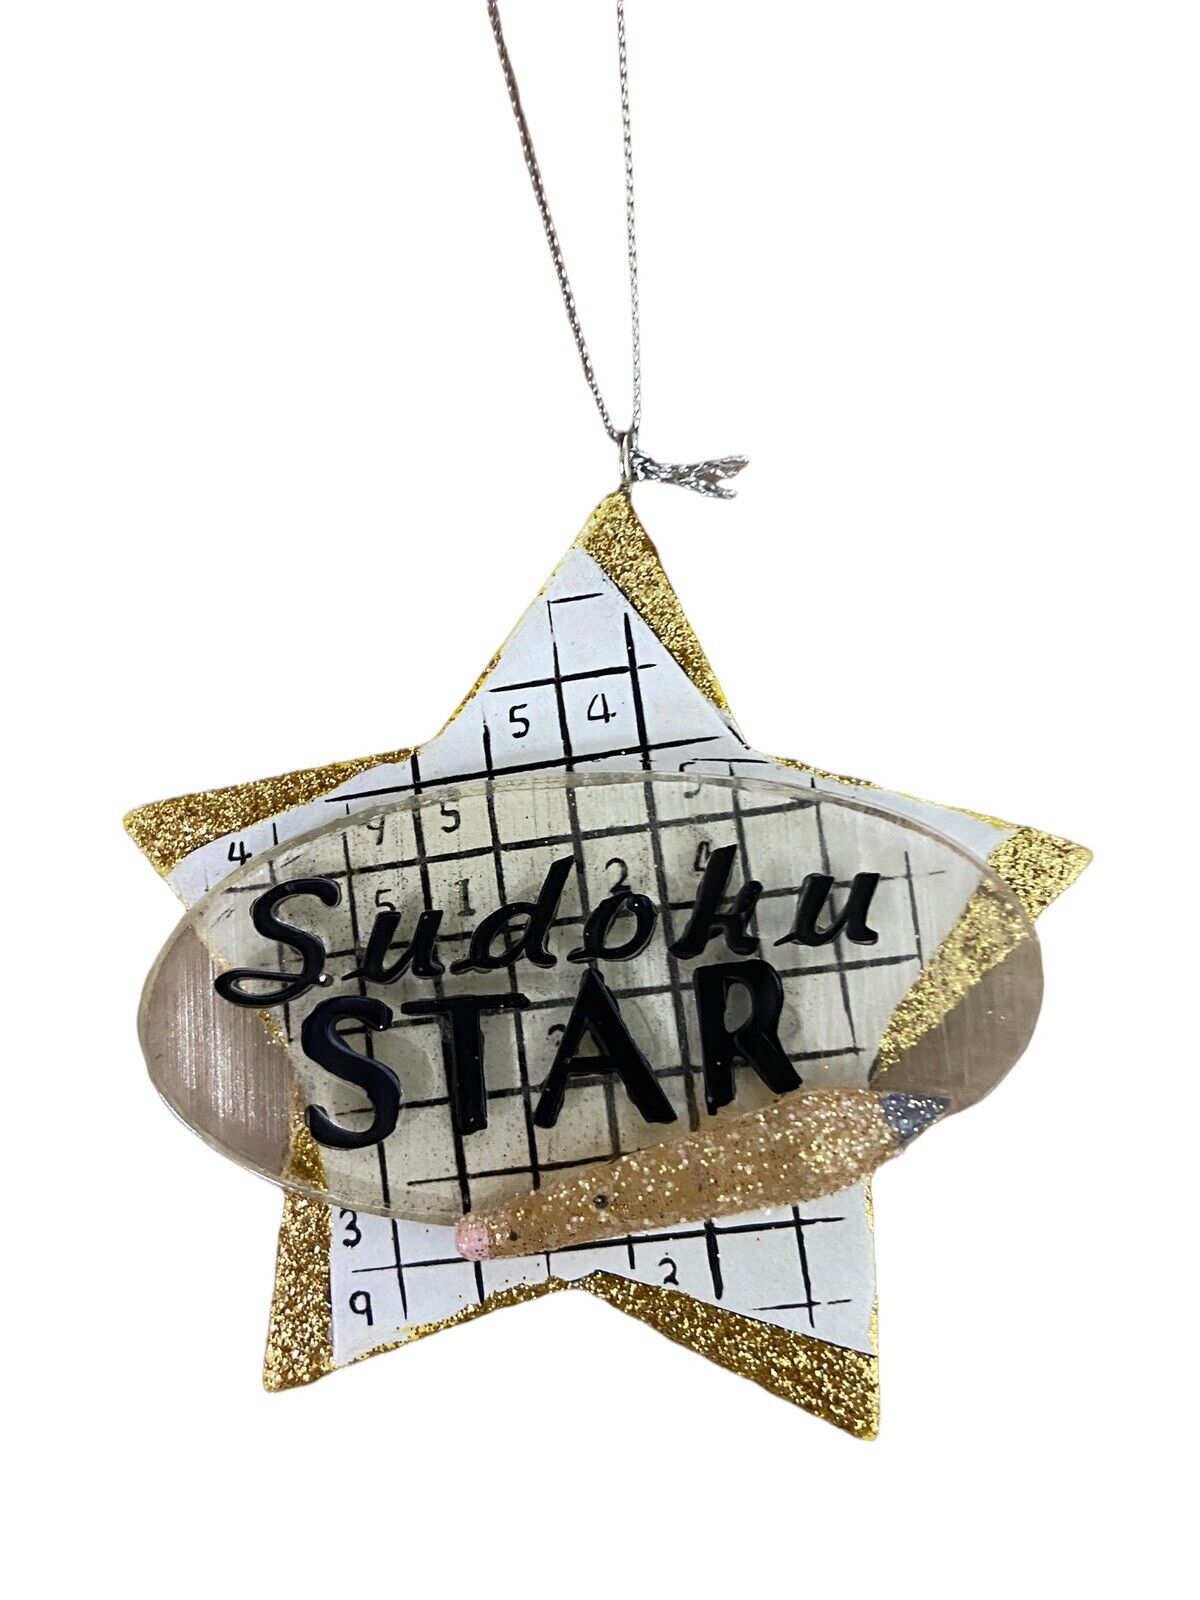 Midwest-CBK  Sudoku Star Puzzle Christmas Game Ornament 